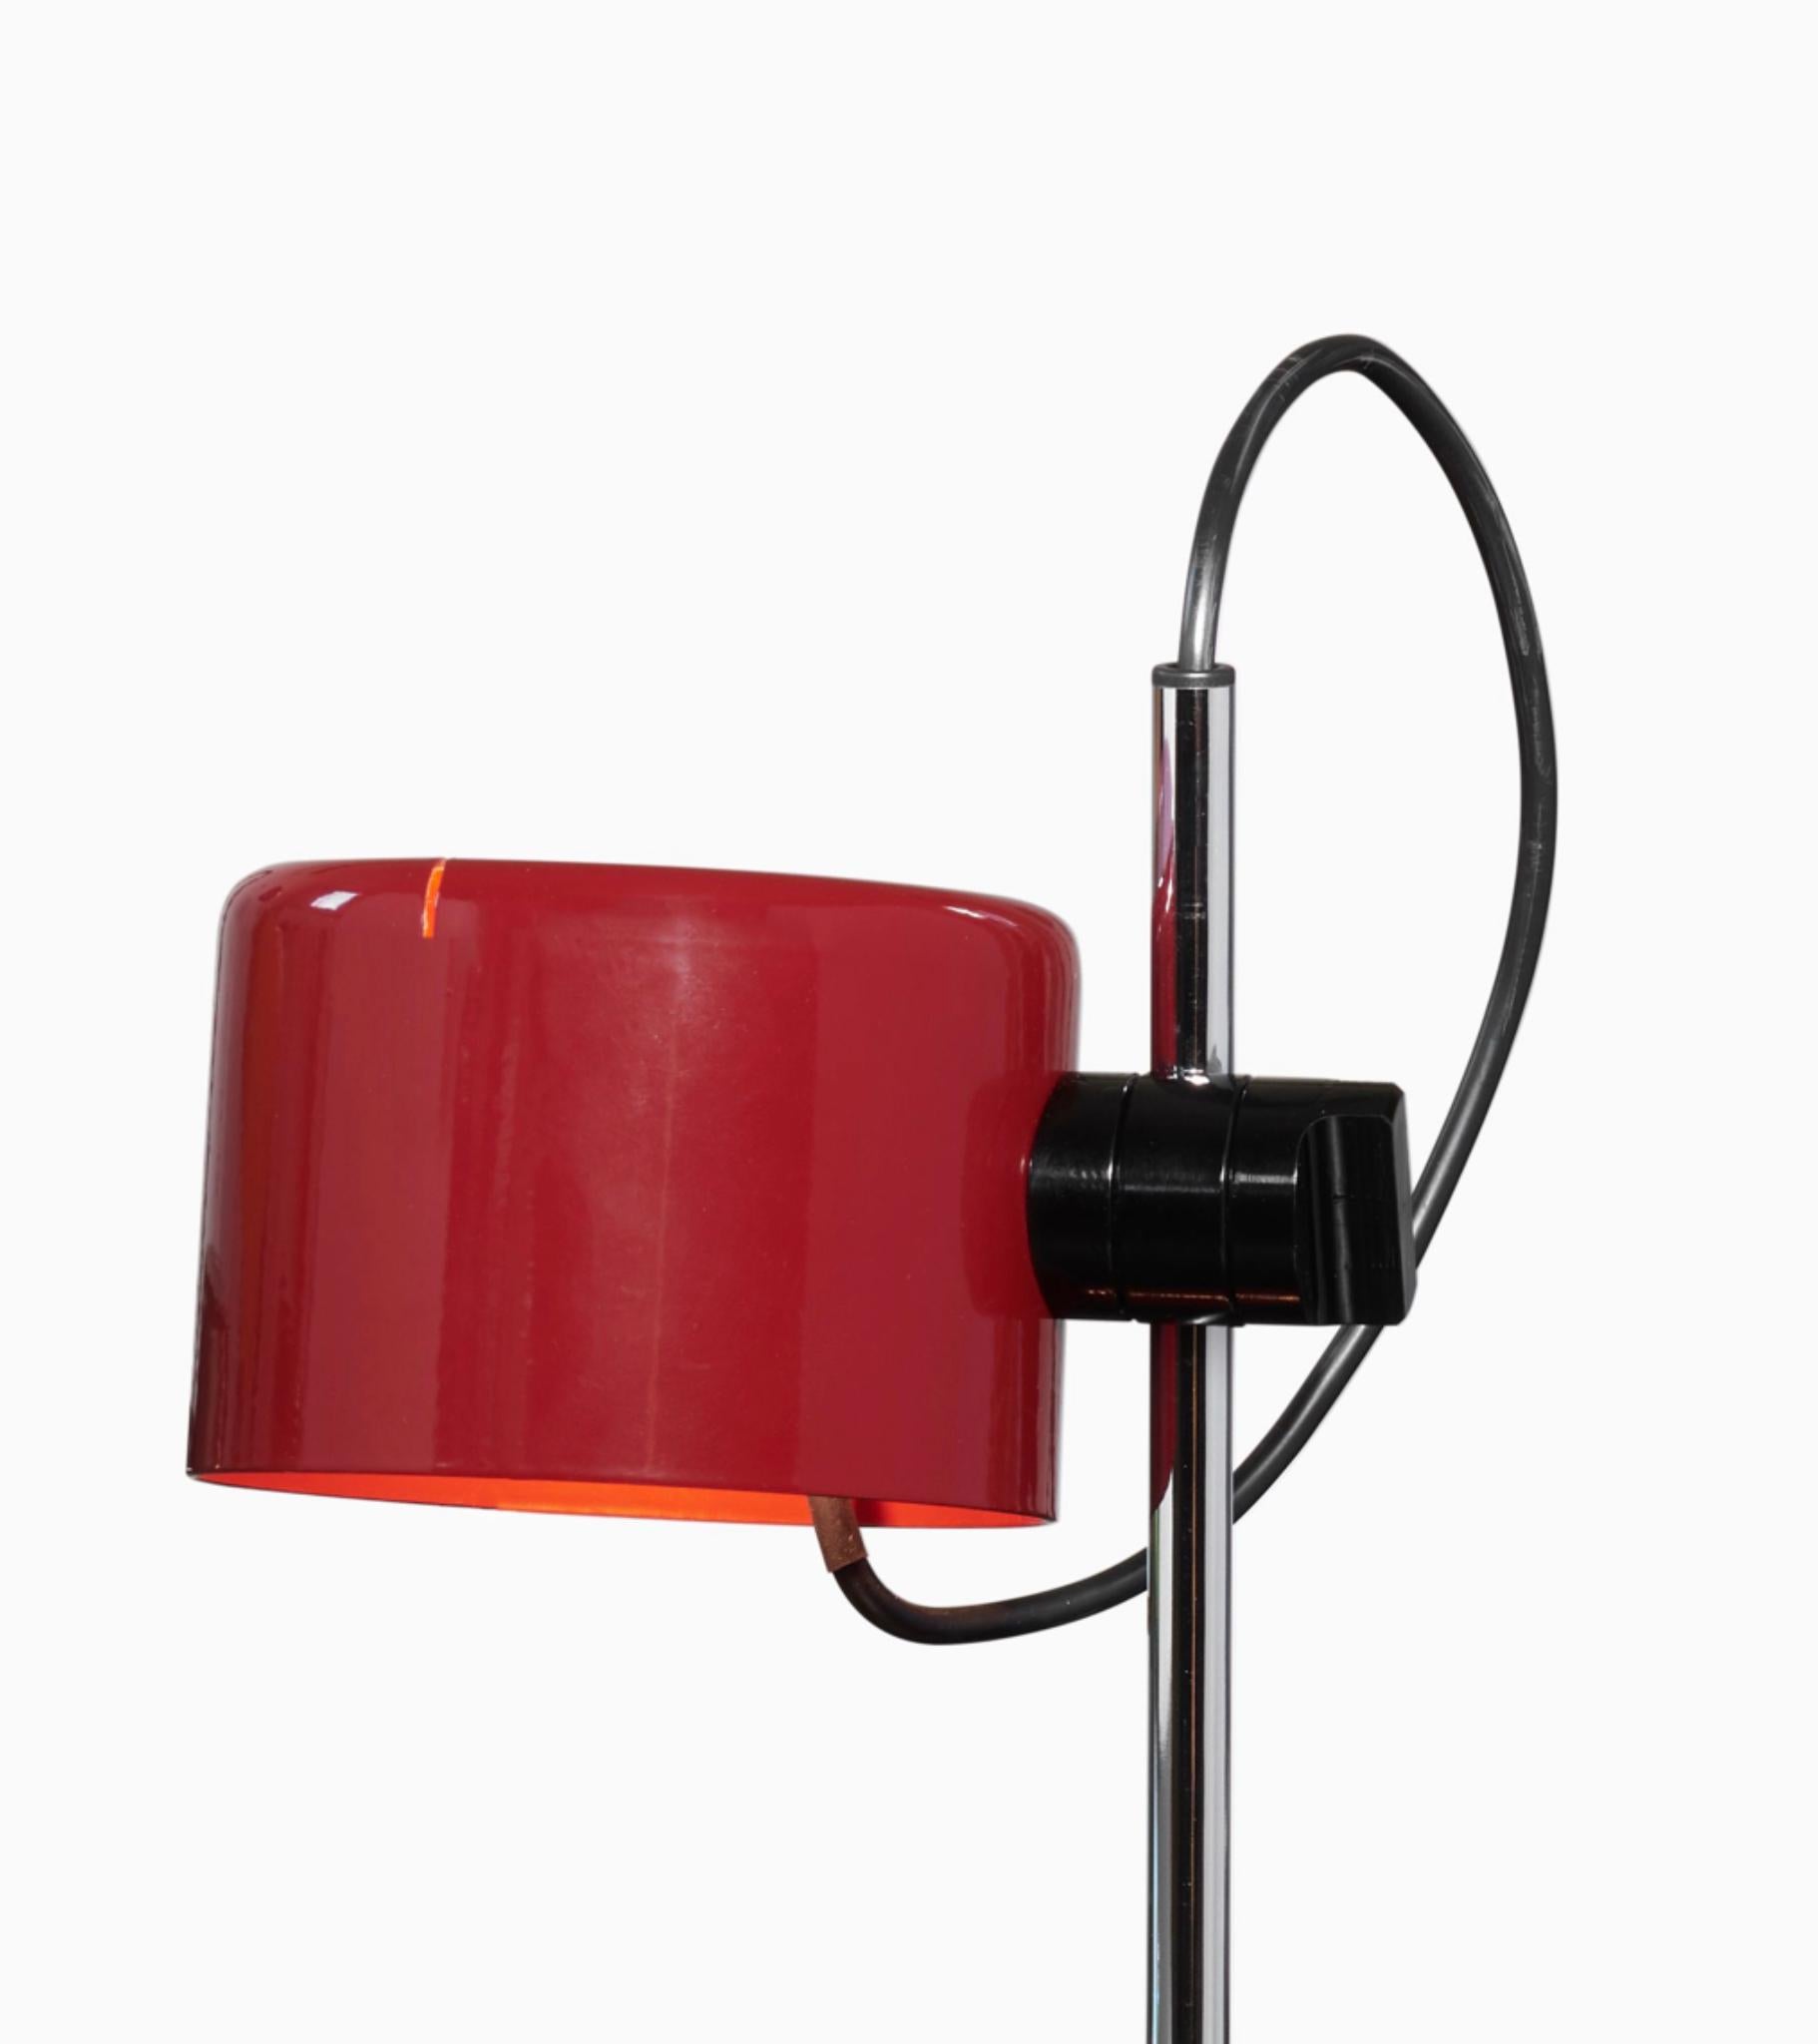 Set of Two Table Lamps model Mini Coupe designed by Joe Colombo.
Table lamp giving direct light, lacquered metal base, chromium-plated stem, adjustable reflector in lacquered aluminium.
Manufactured by Oluce, Italy.

Coupé originated in 1967 from